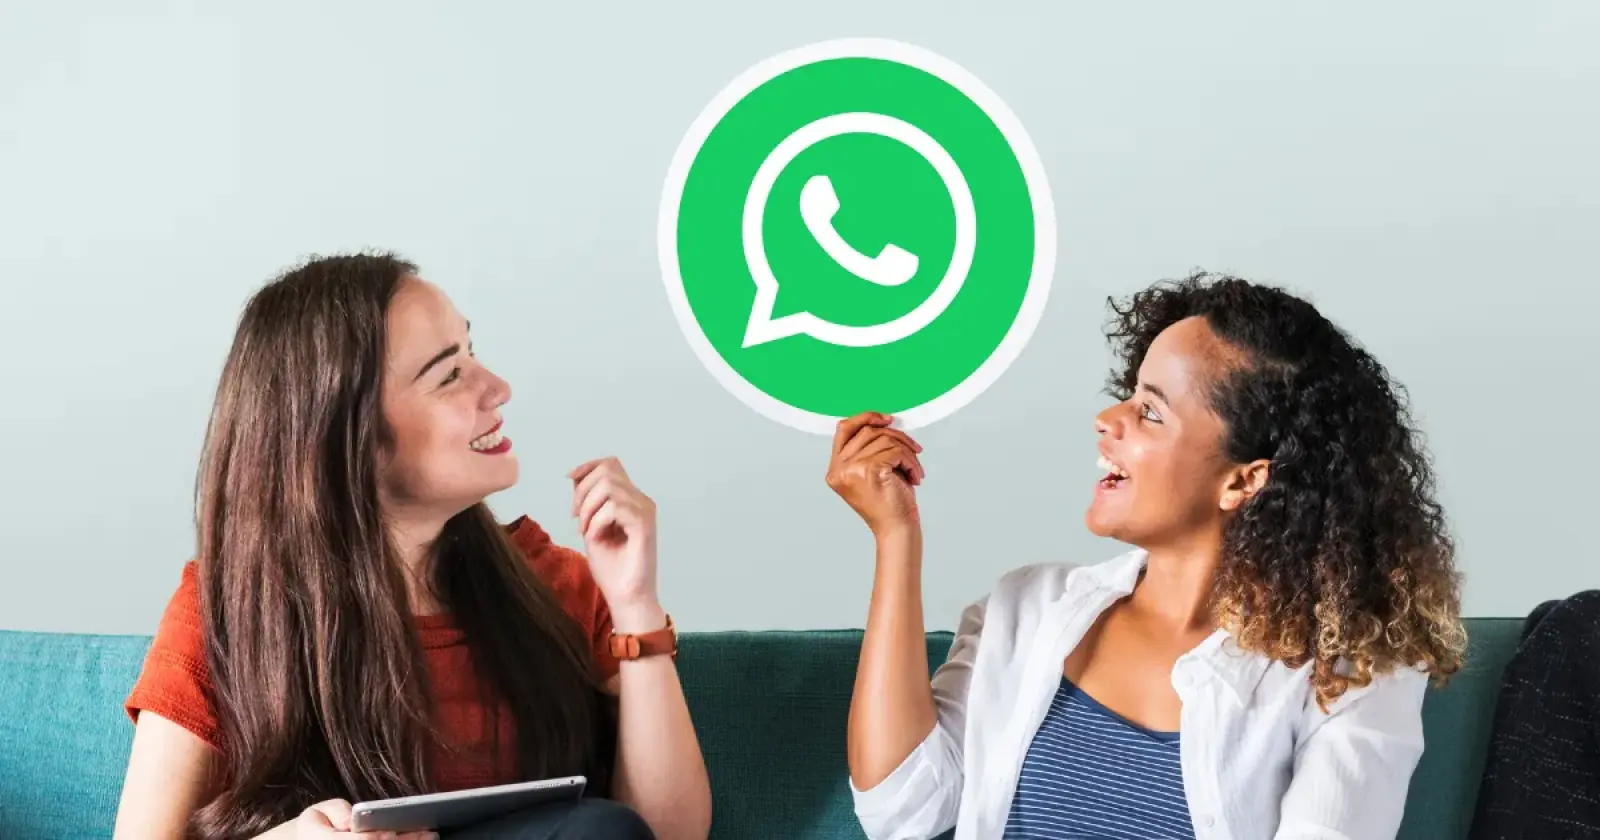 New feature coming in WhatsApp, you will be able to pin events in the community